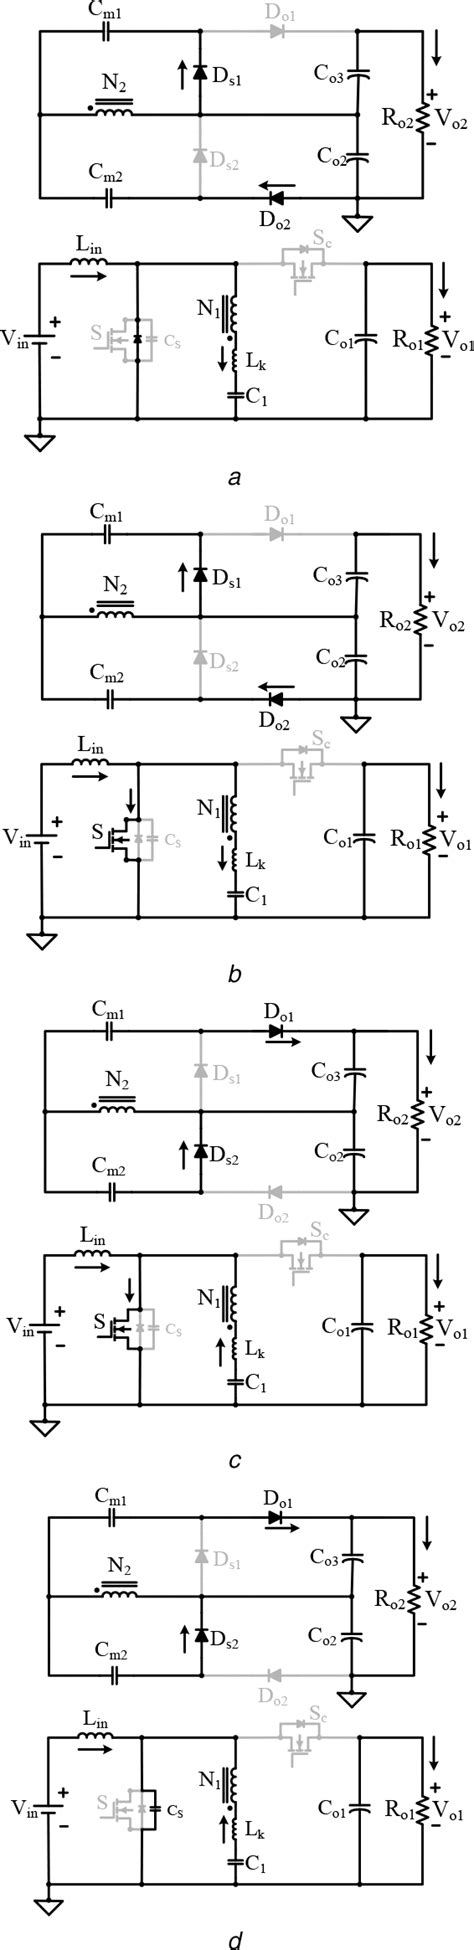 operational modes of the proposed converter a mode 1 b mode 2 c download scientific